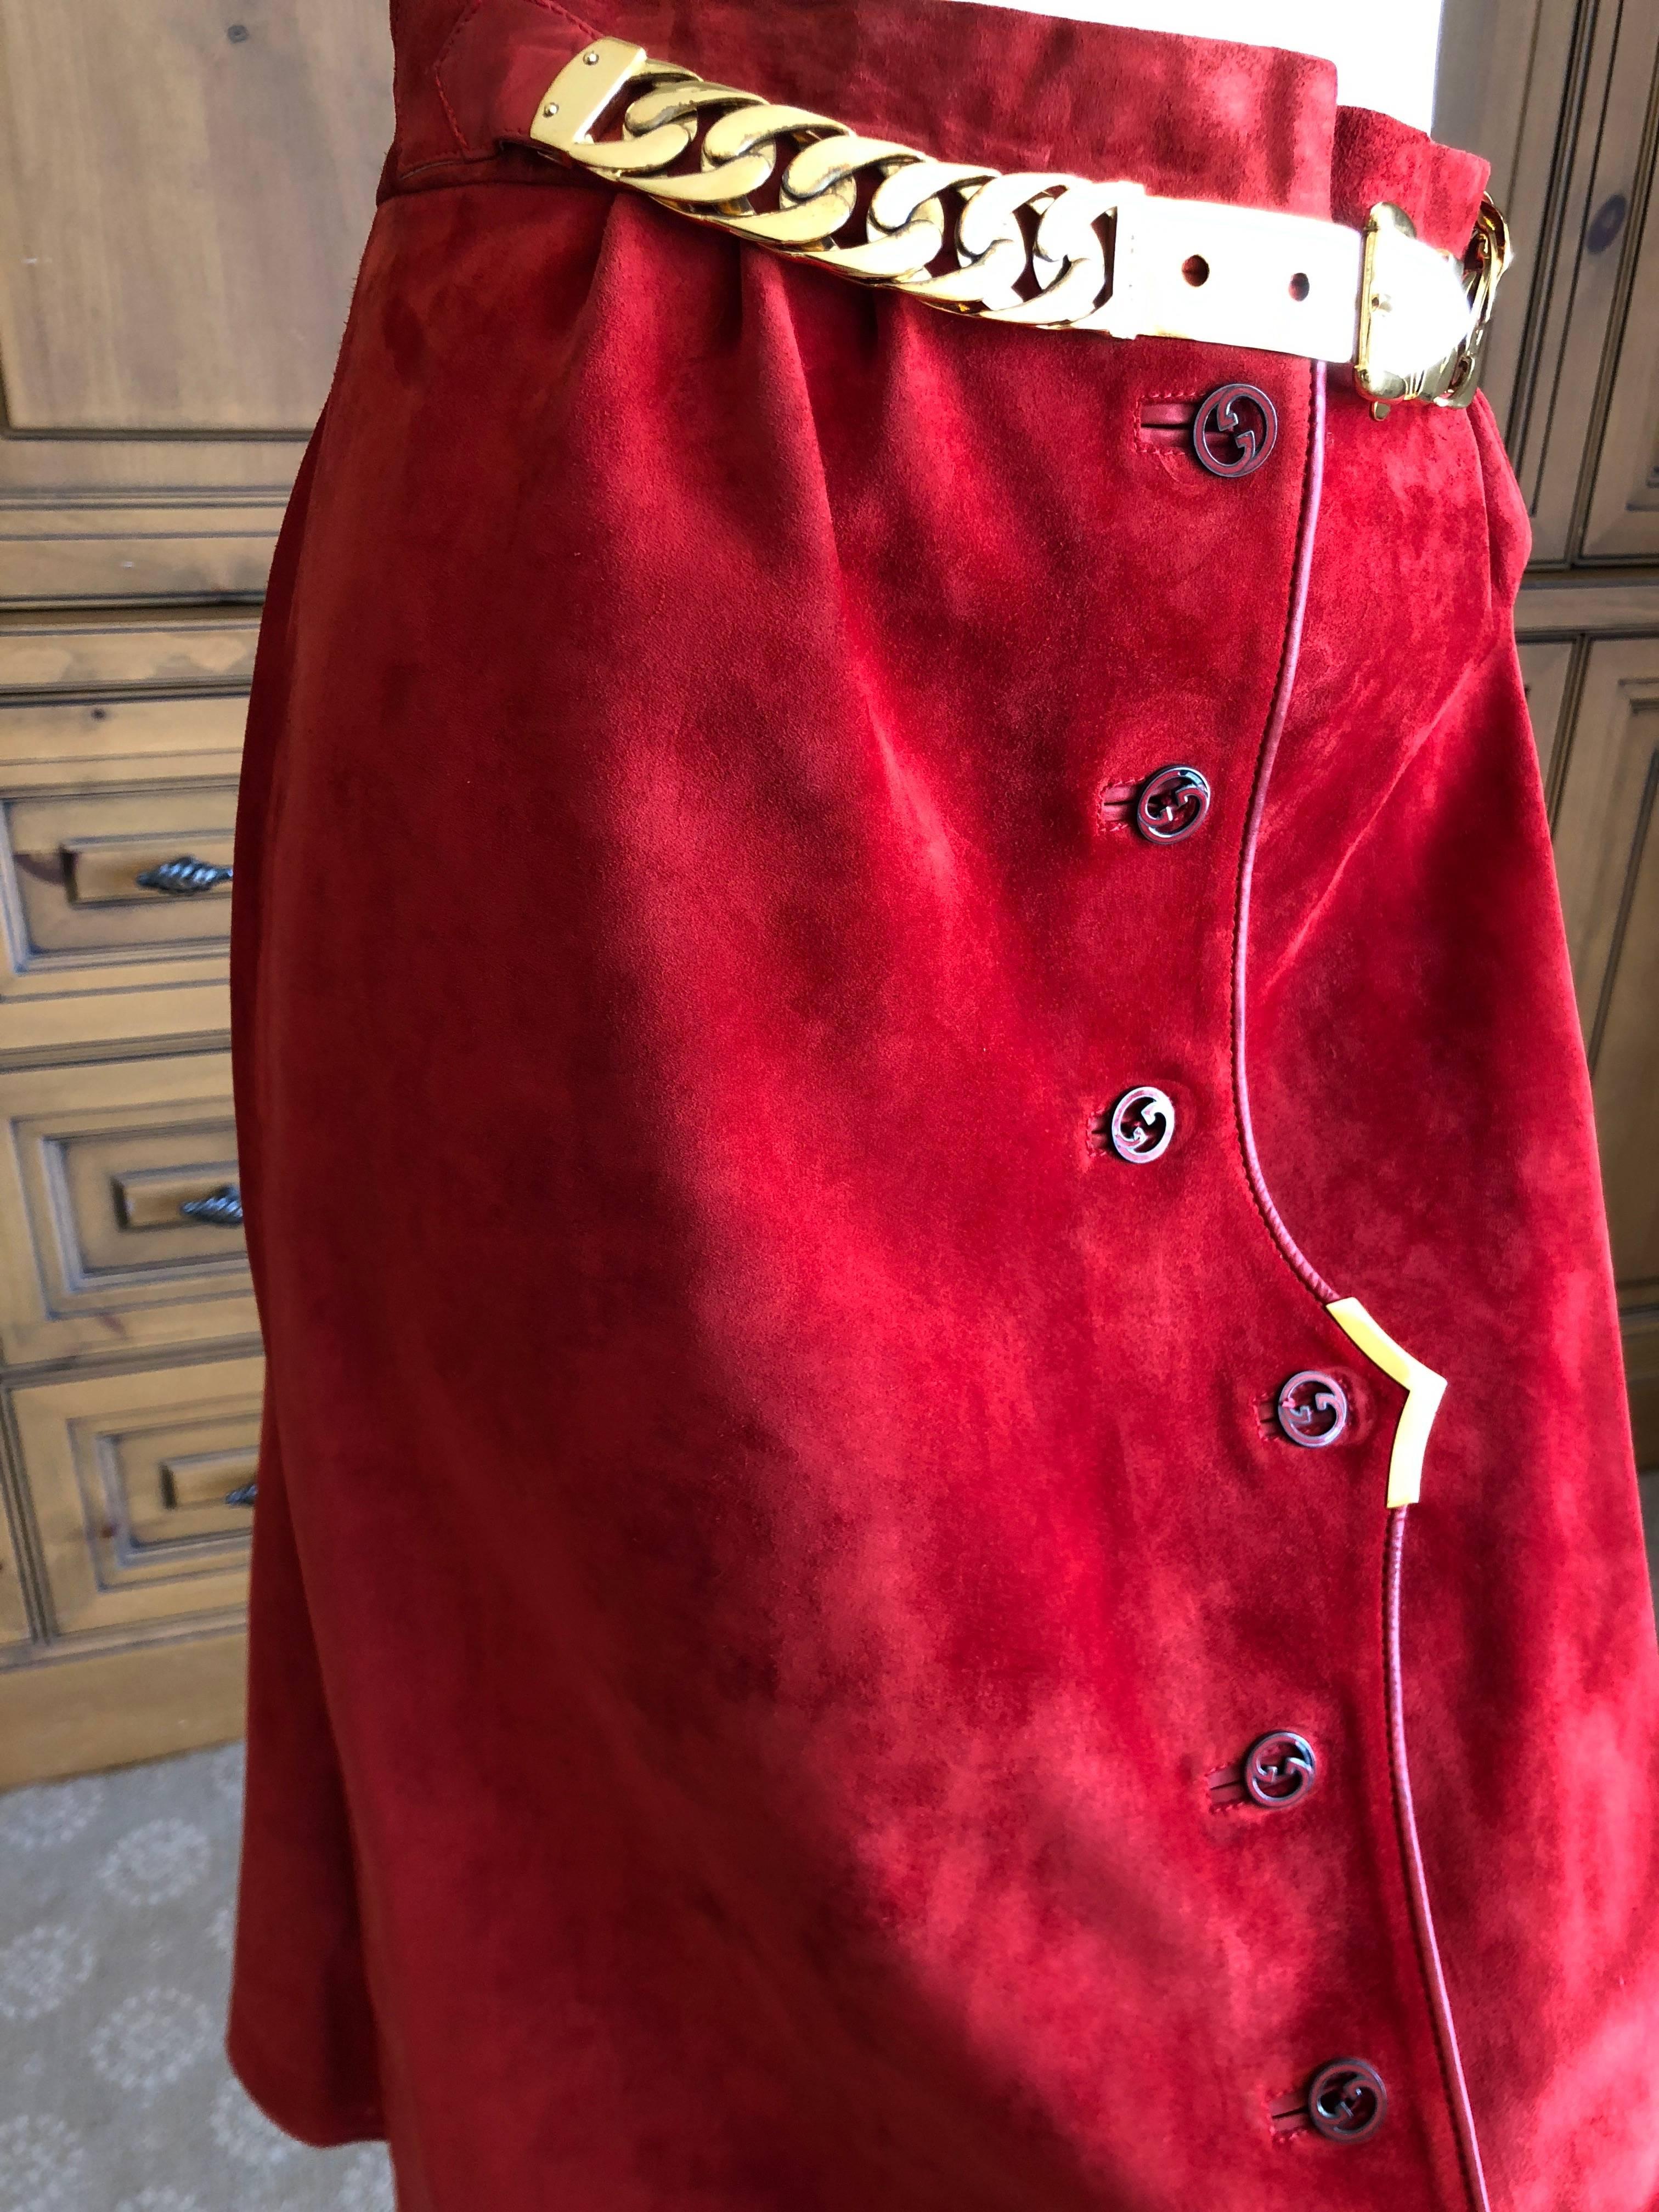  Gucci 1970's Red Leather Trim Suede Skirt with Chain Details and Big GG Buttons In Excellent Condition For Sale In Cloverdale, CA